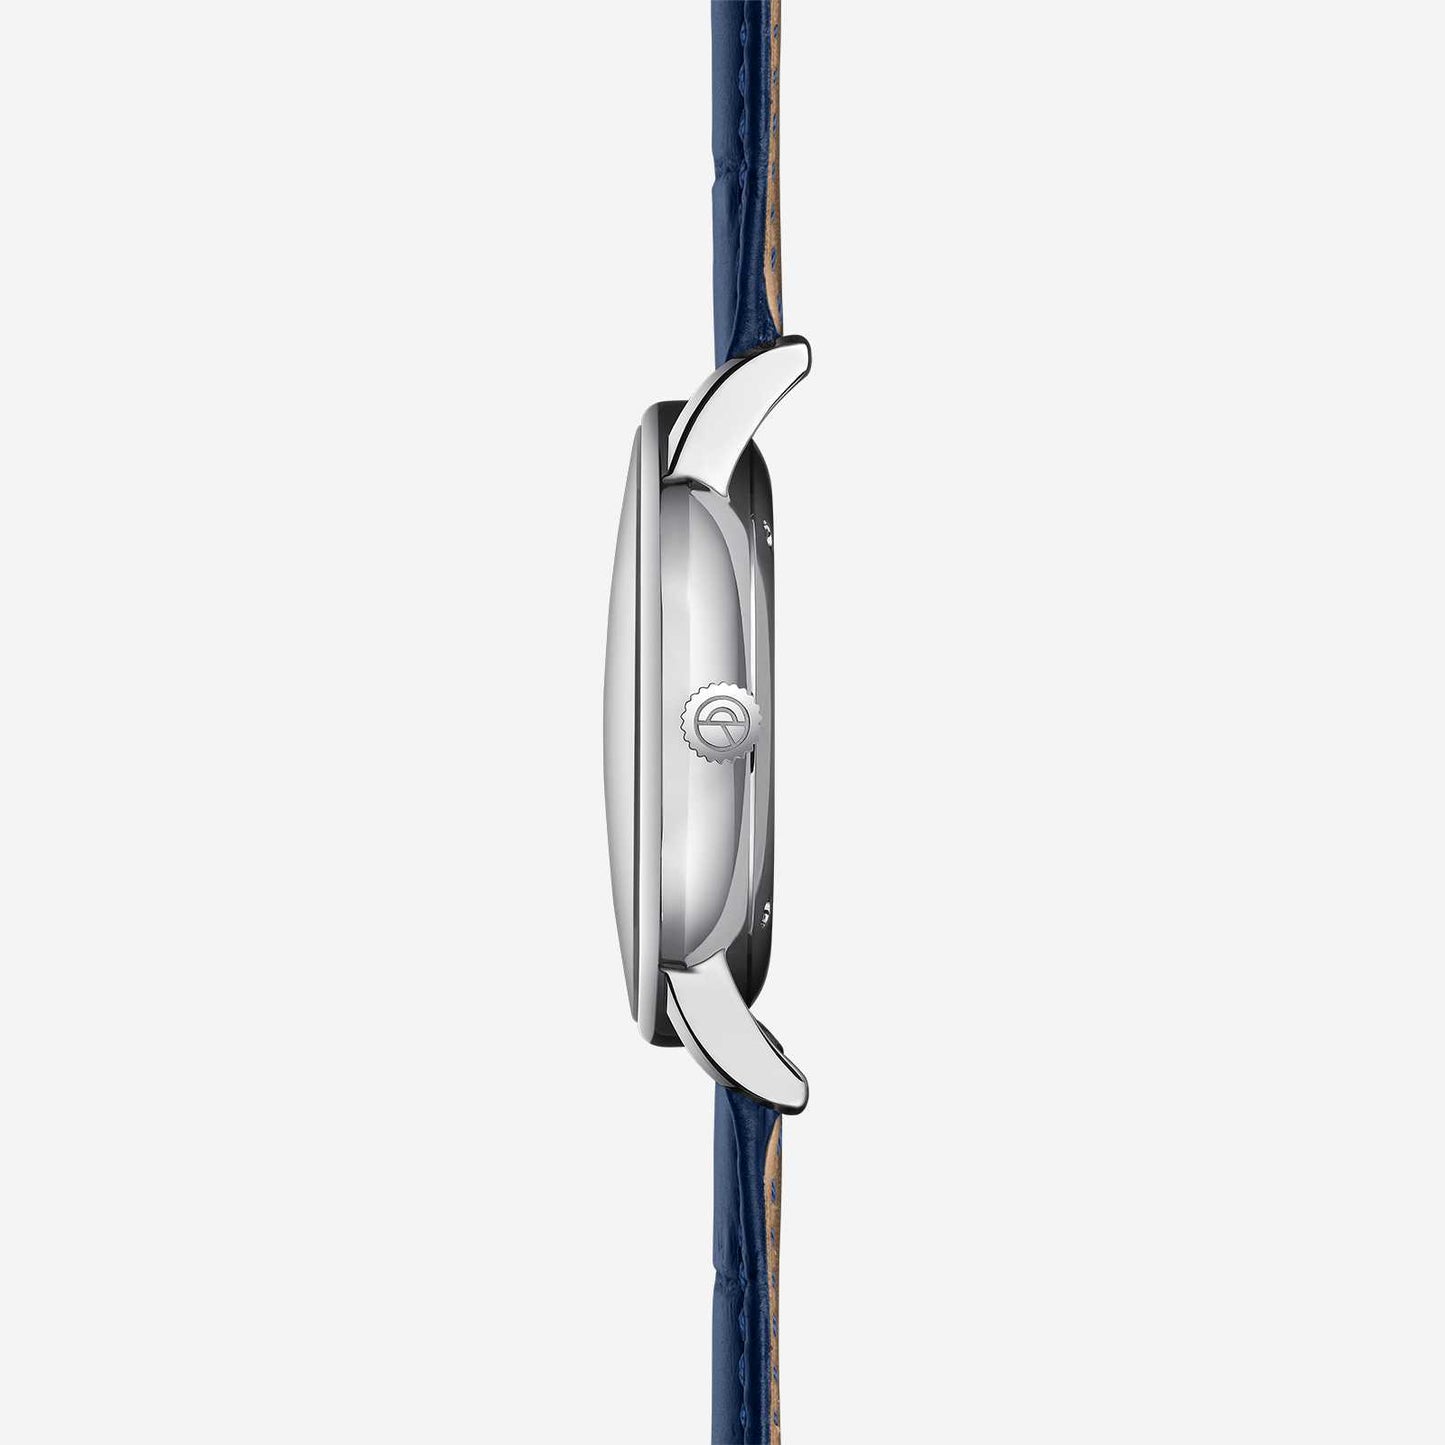 popup|Scratch-resistant sapphire crystal|The finely curved and double anti-reflective sapphire crystal ensures a clear view - the premium class of watch crystals.